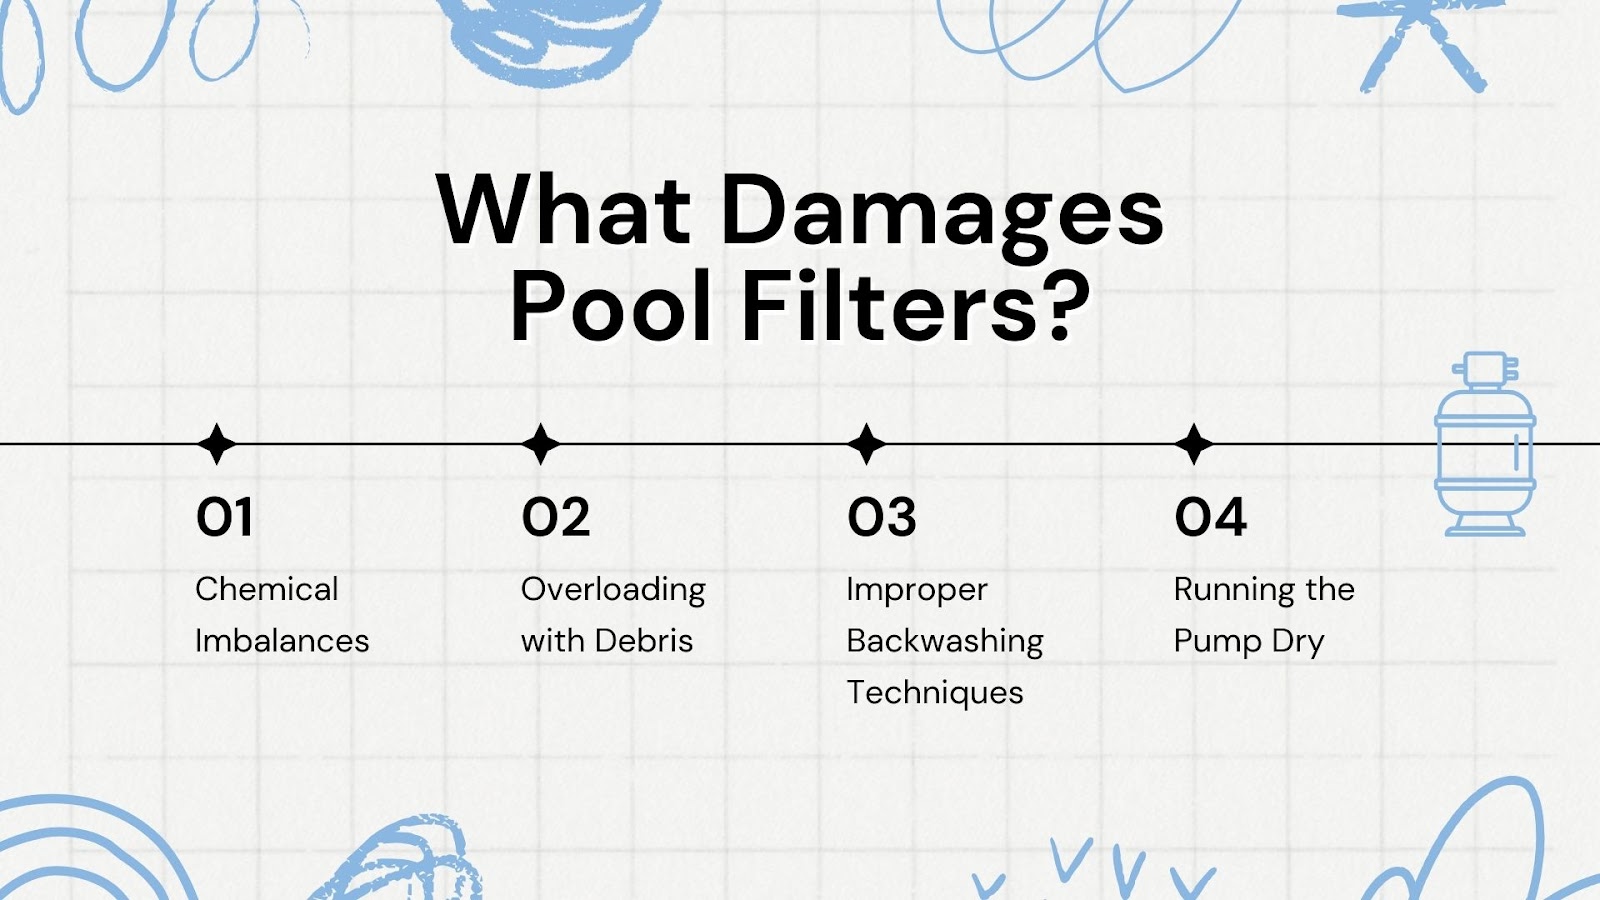 What Damages Pool Filters?